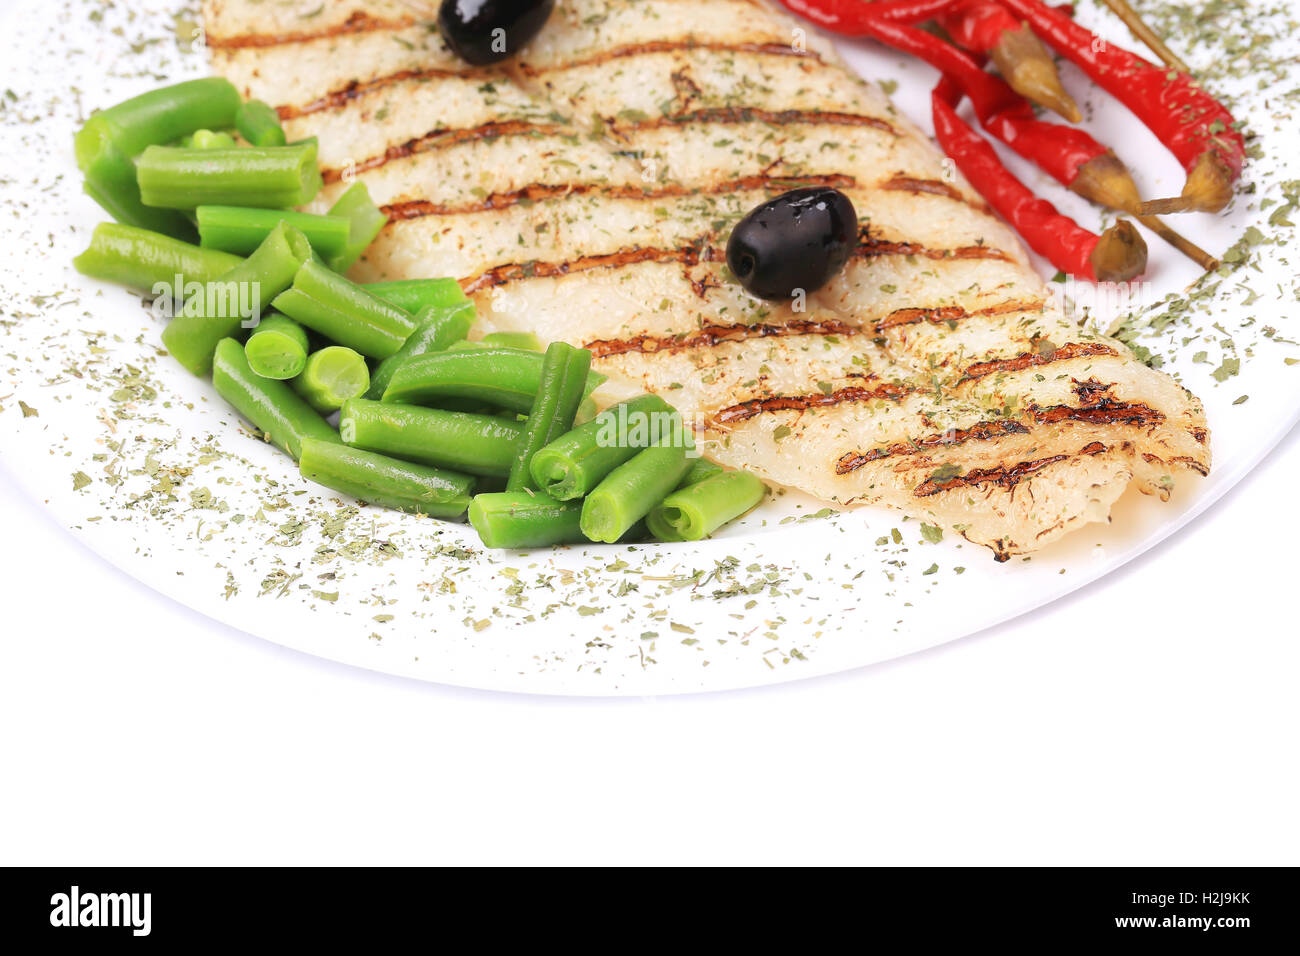 Grilled fish with herbs. Stock Photo